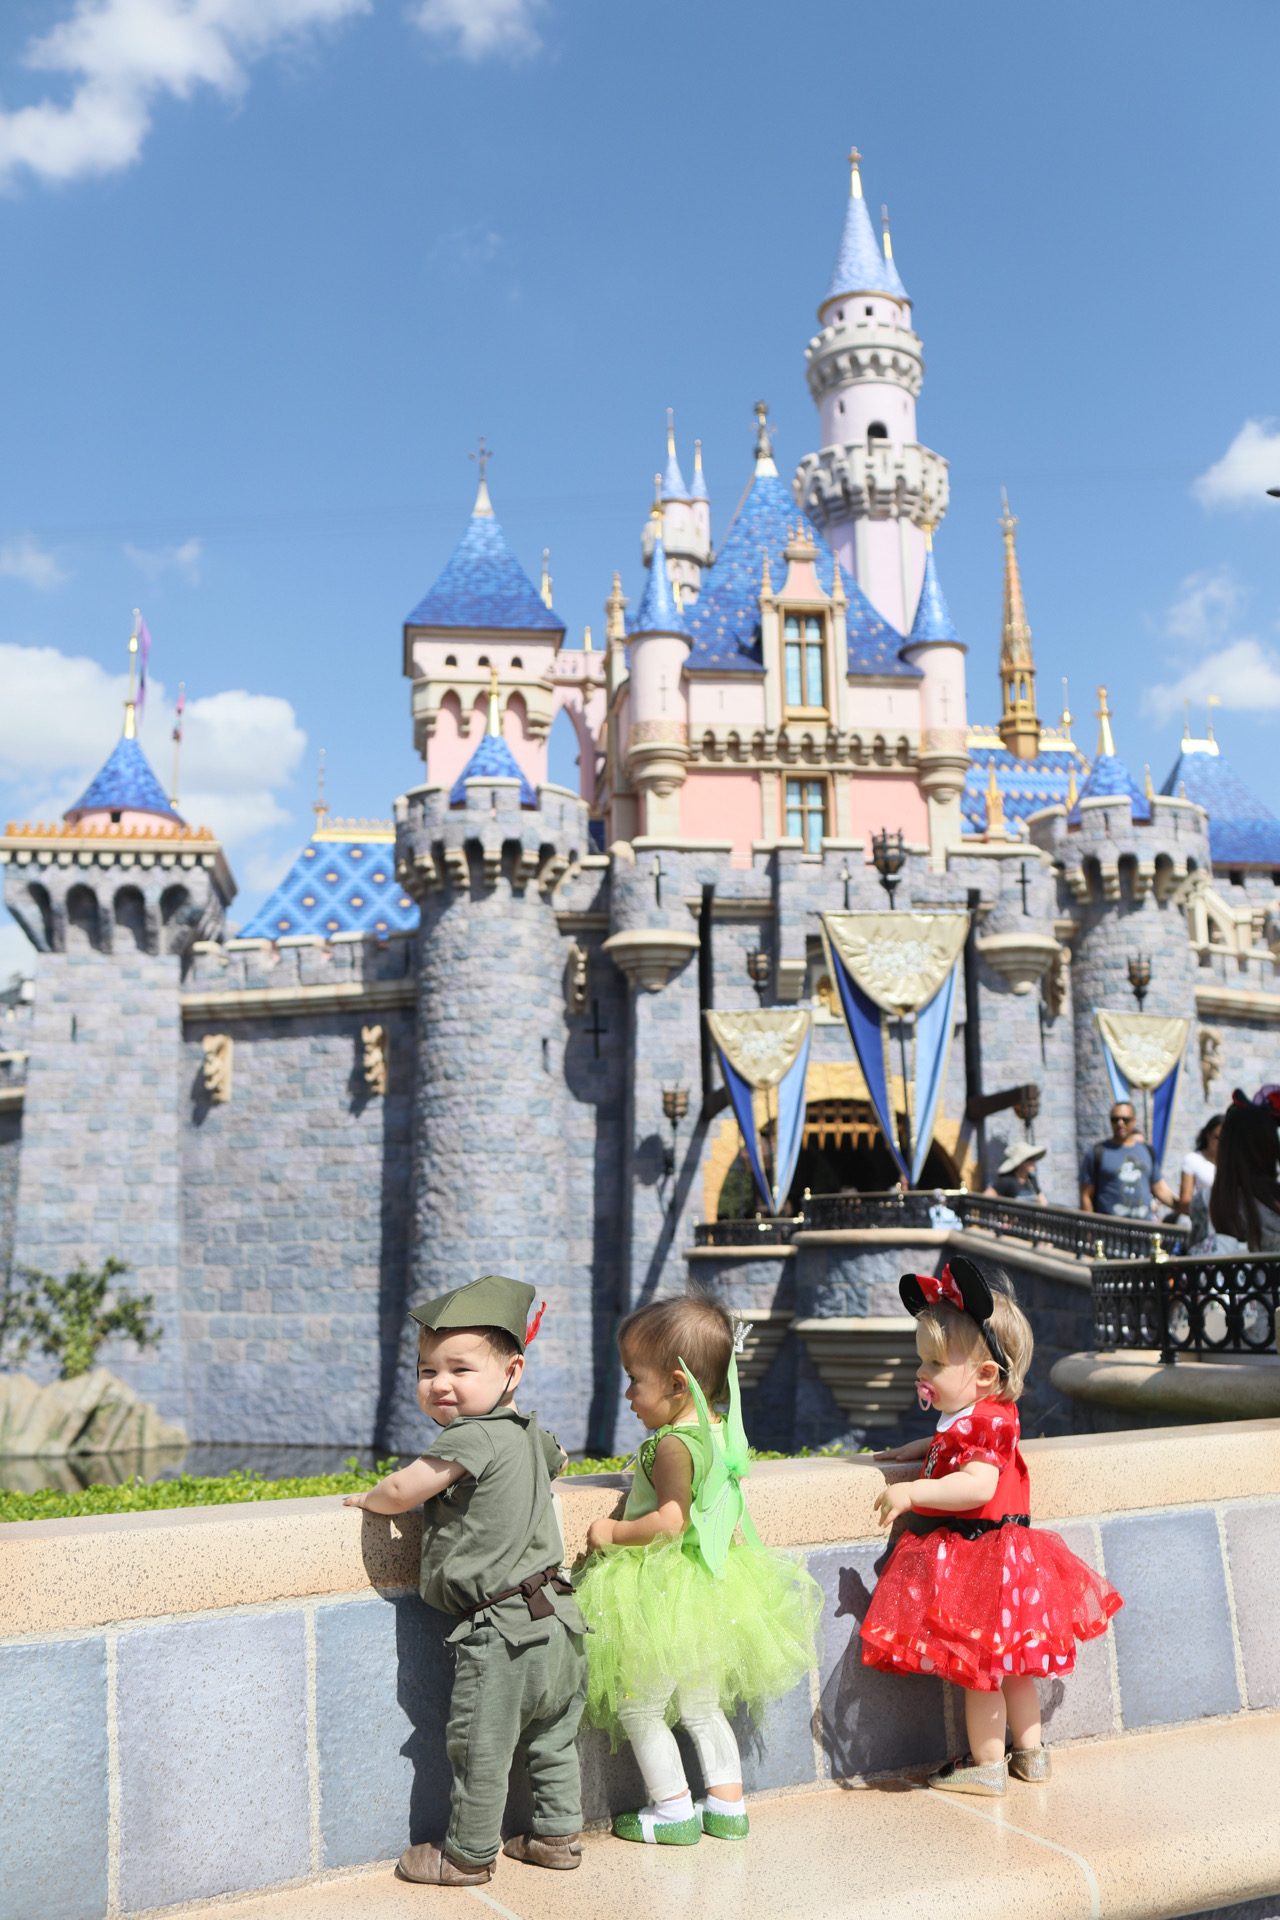 Disneyland with Toddlers - 10 Things To Do at Disneyland with Toddlers